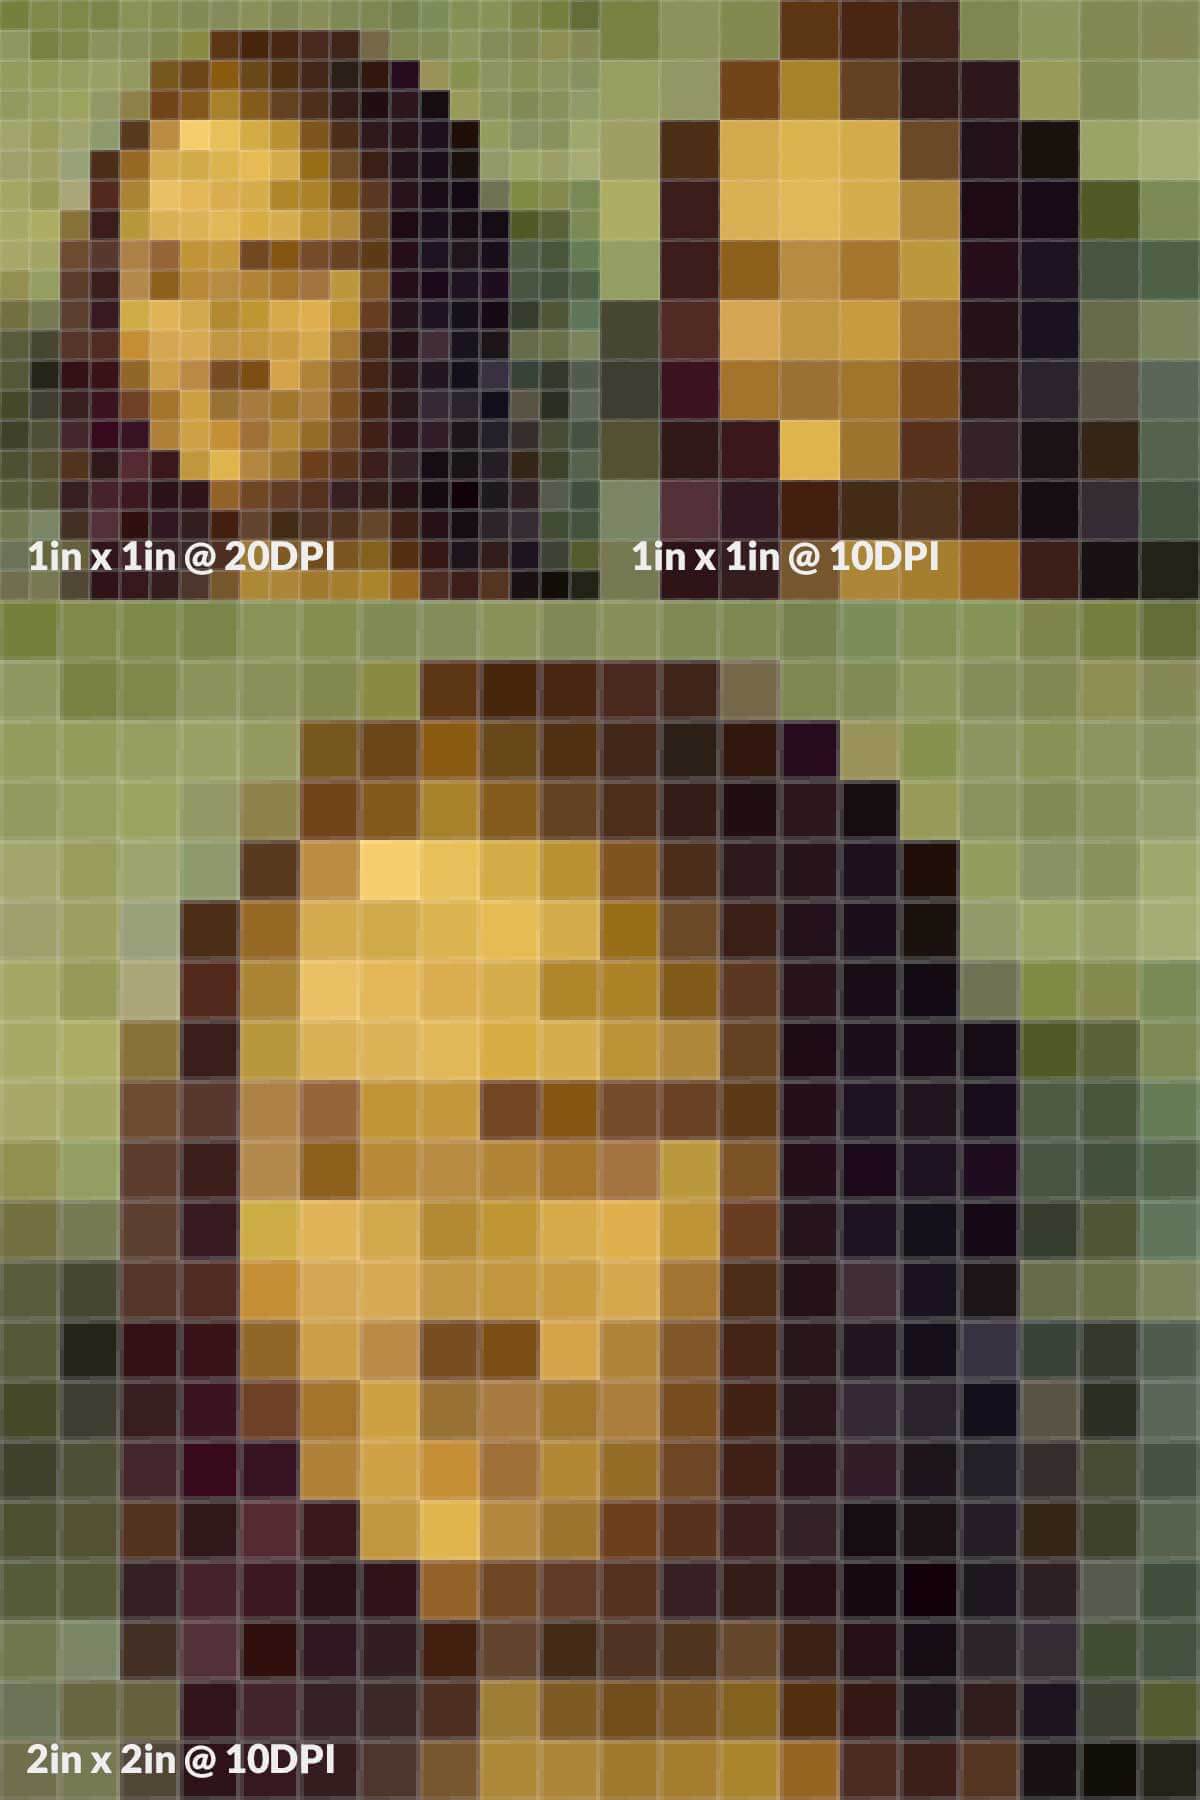 A digital Mona Lisa at different resolutions and sizes